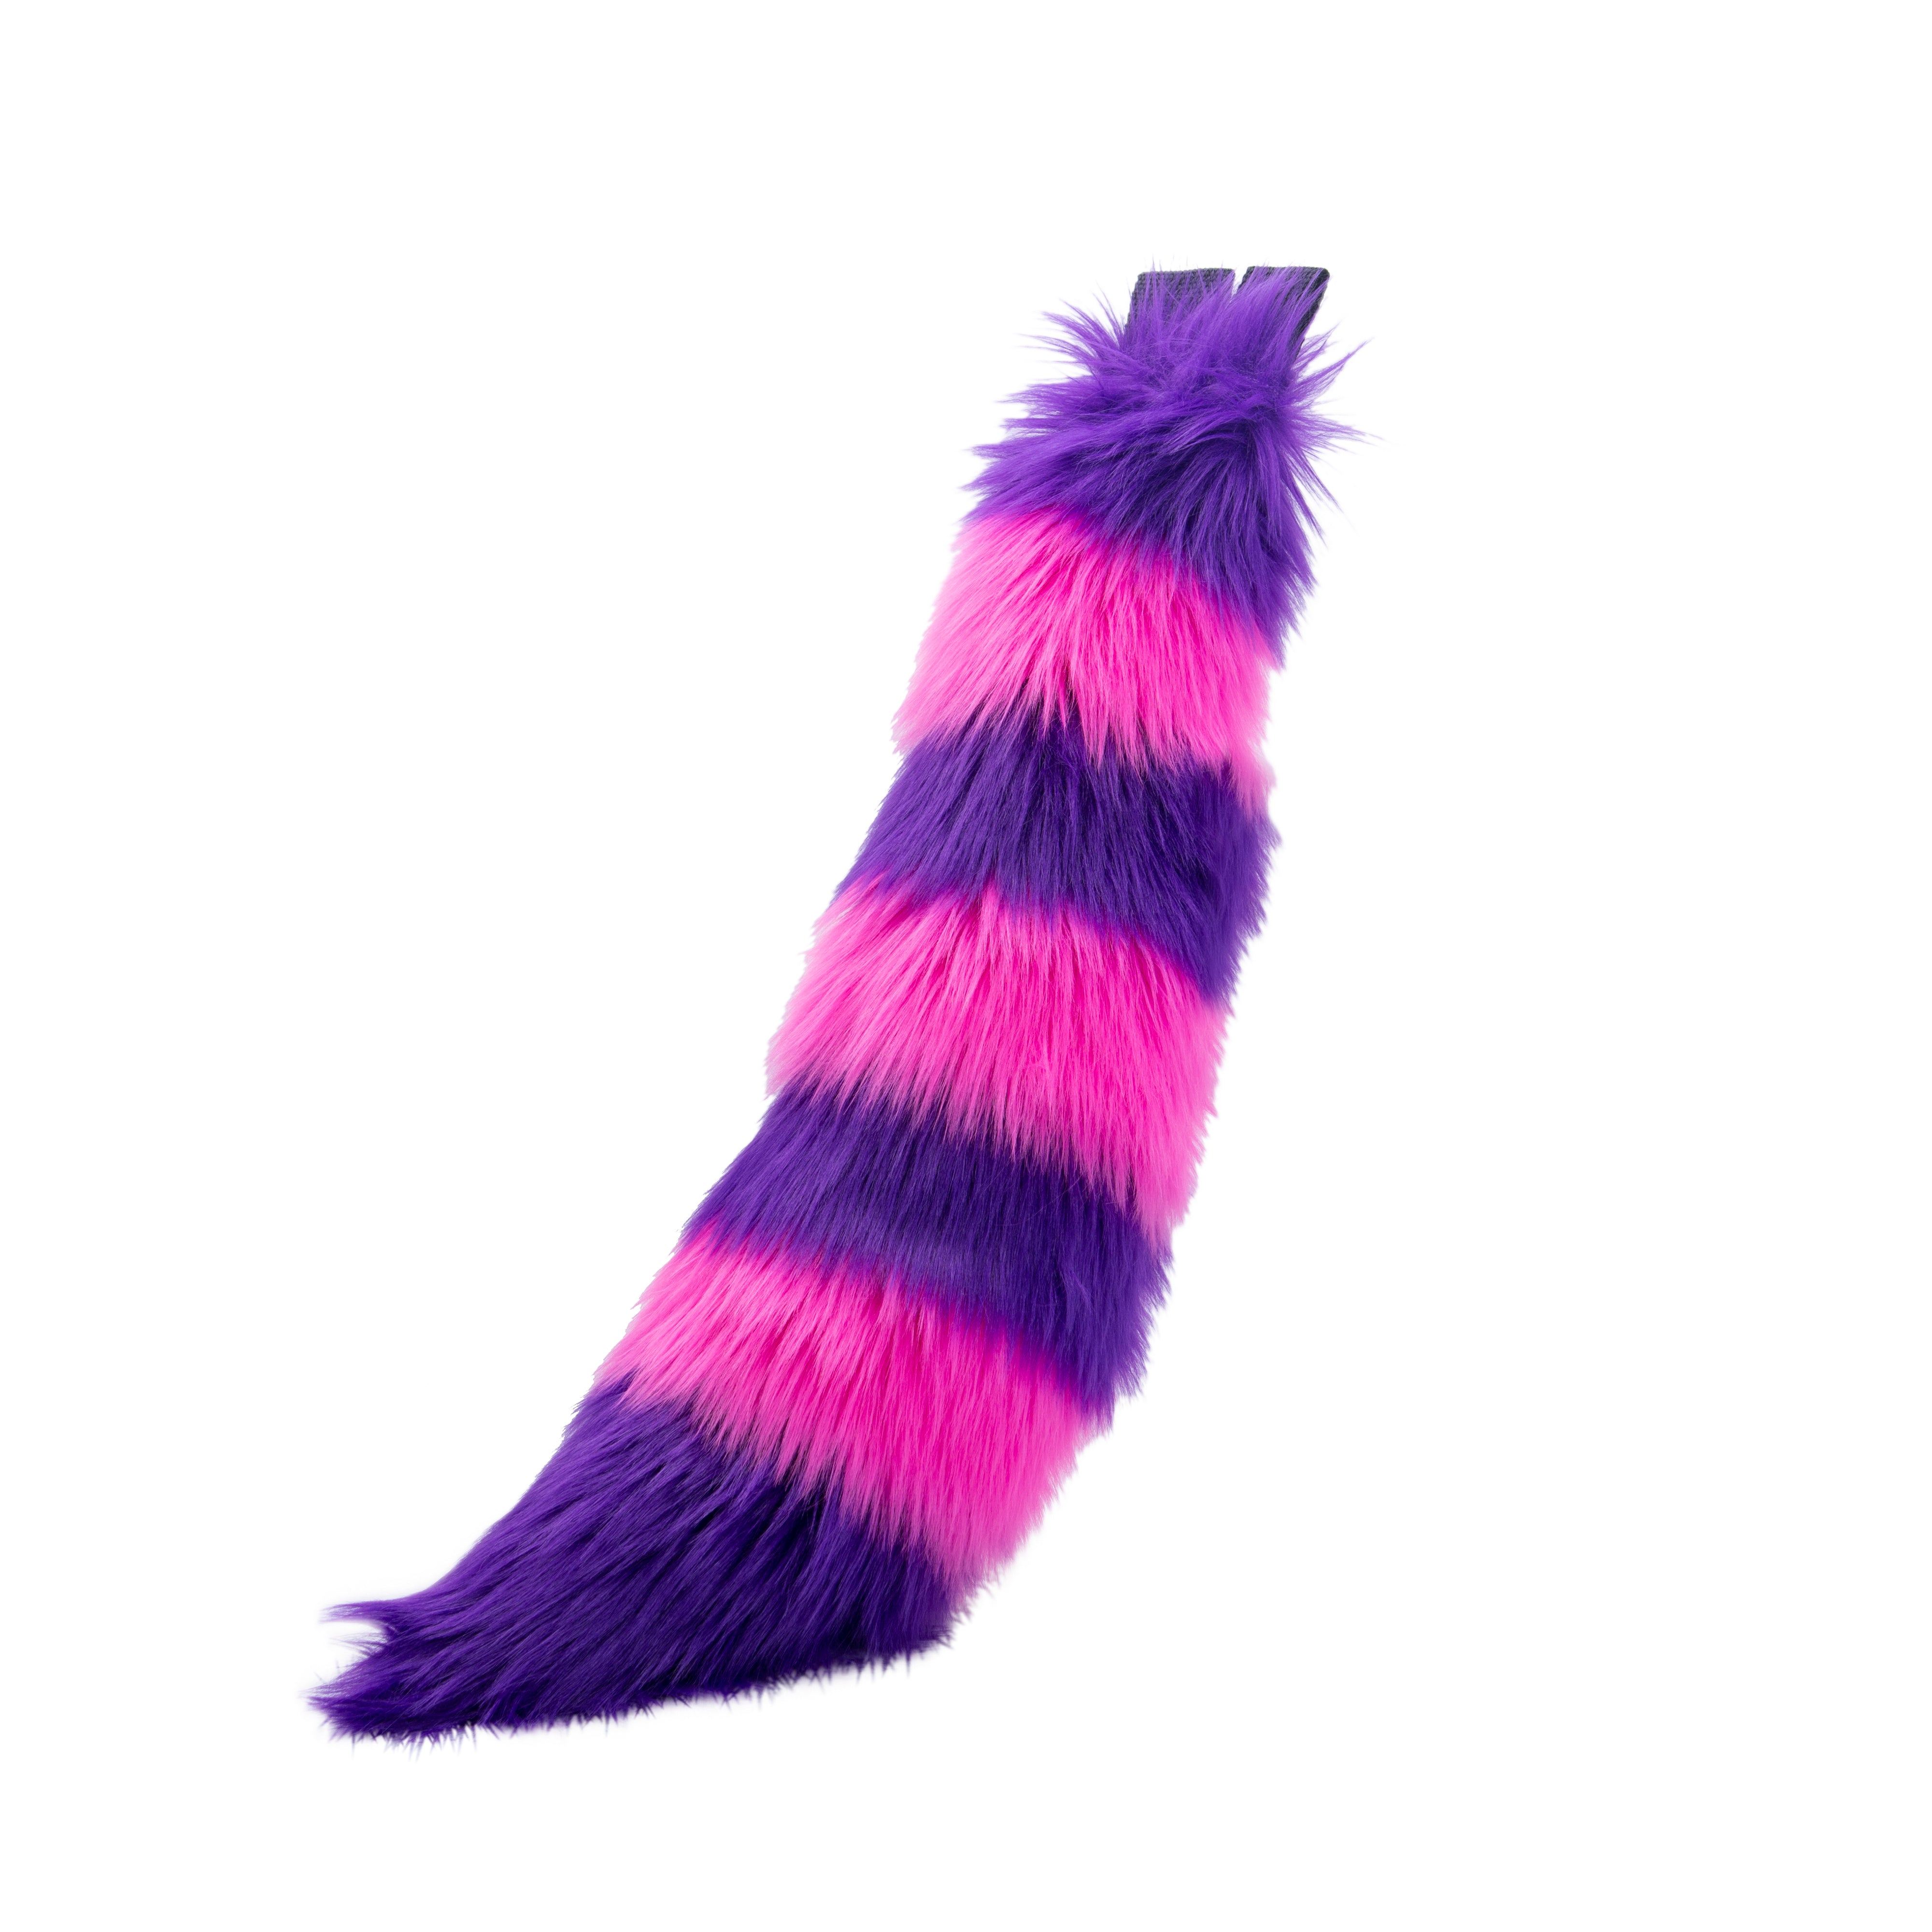 Pawstar Cheshire Mini Fox Tail alice in wonderland furry fluffy partial fursuit halloween costume or cosplay accessory